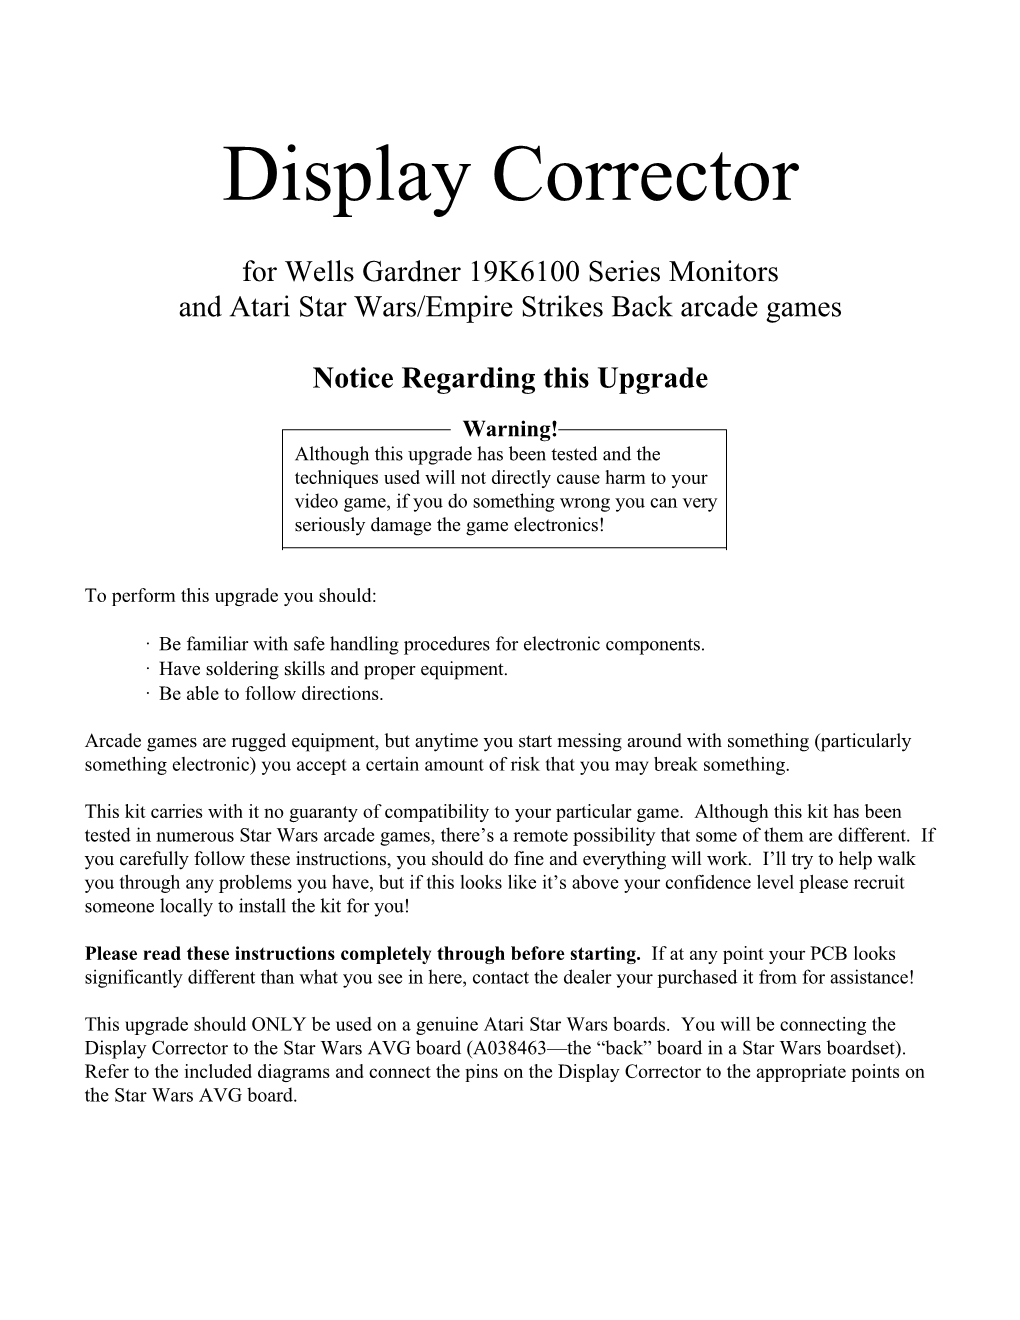 Display Corrector Installation and Customization Instructions for Star Wars